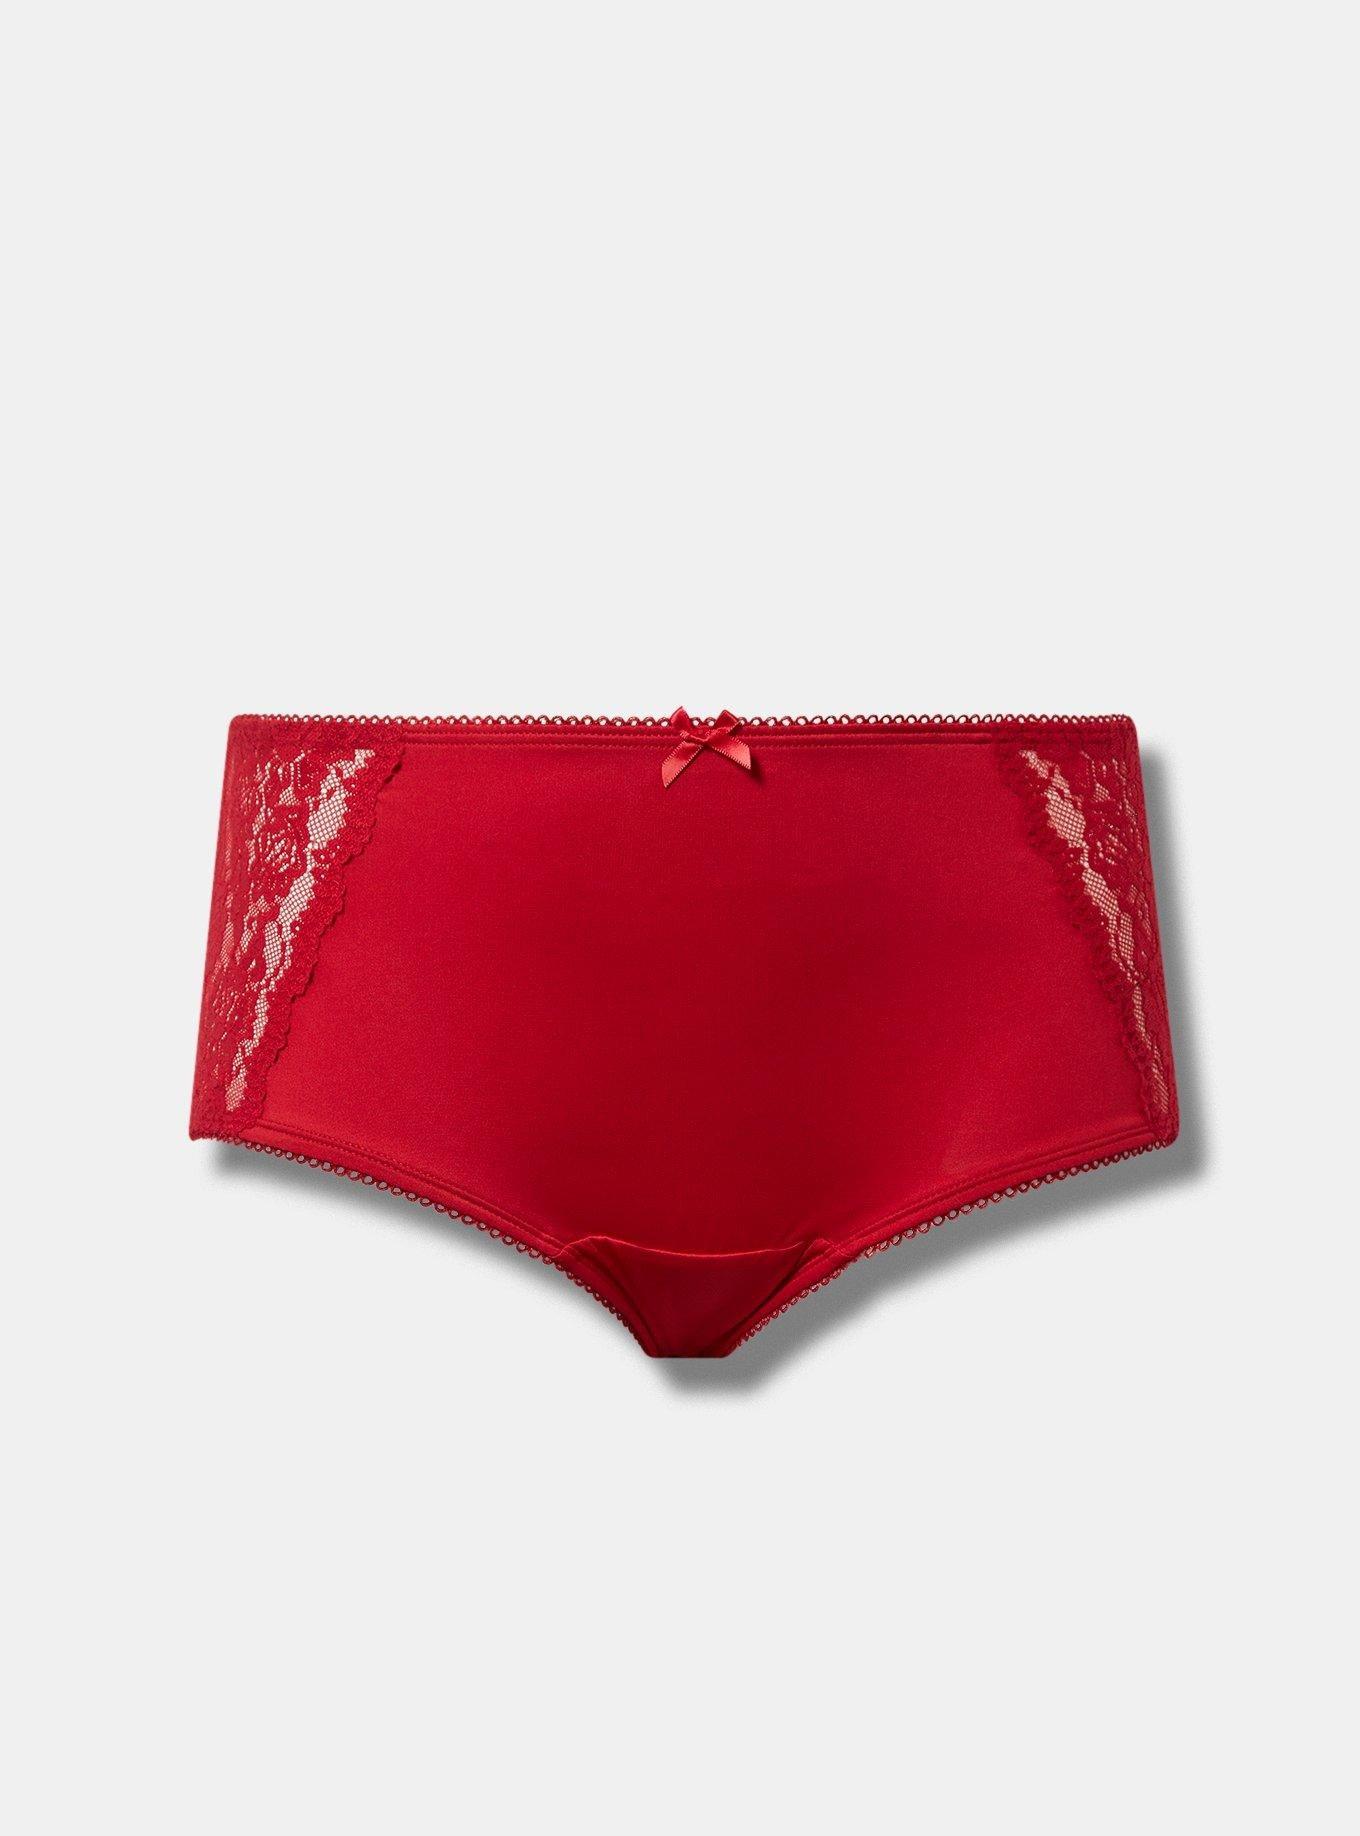 Sheer X Cheeky Panty in Pink & Red